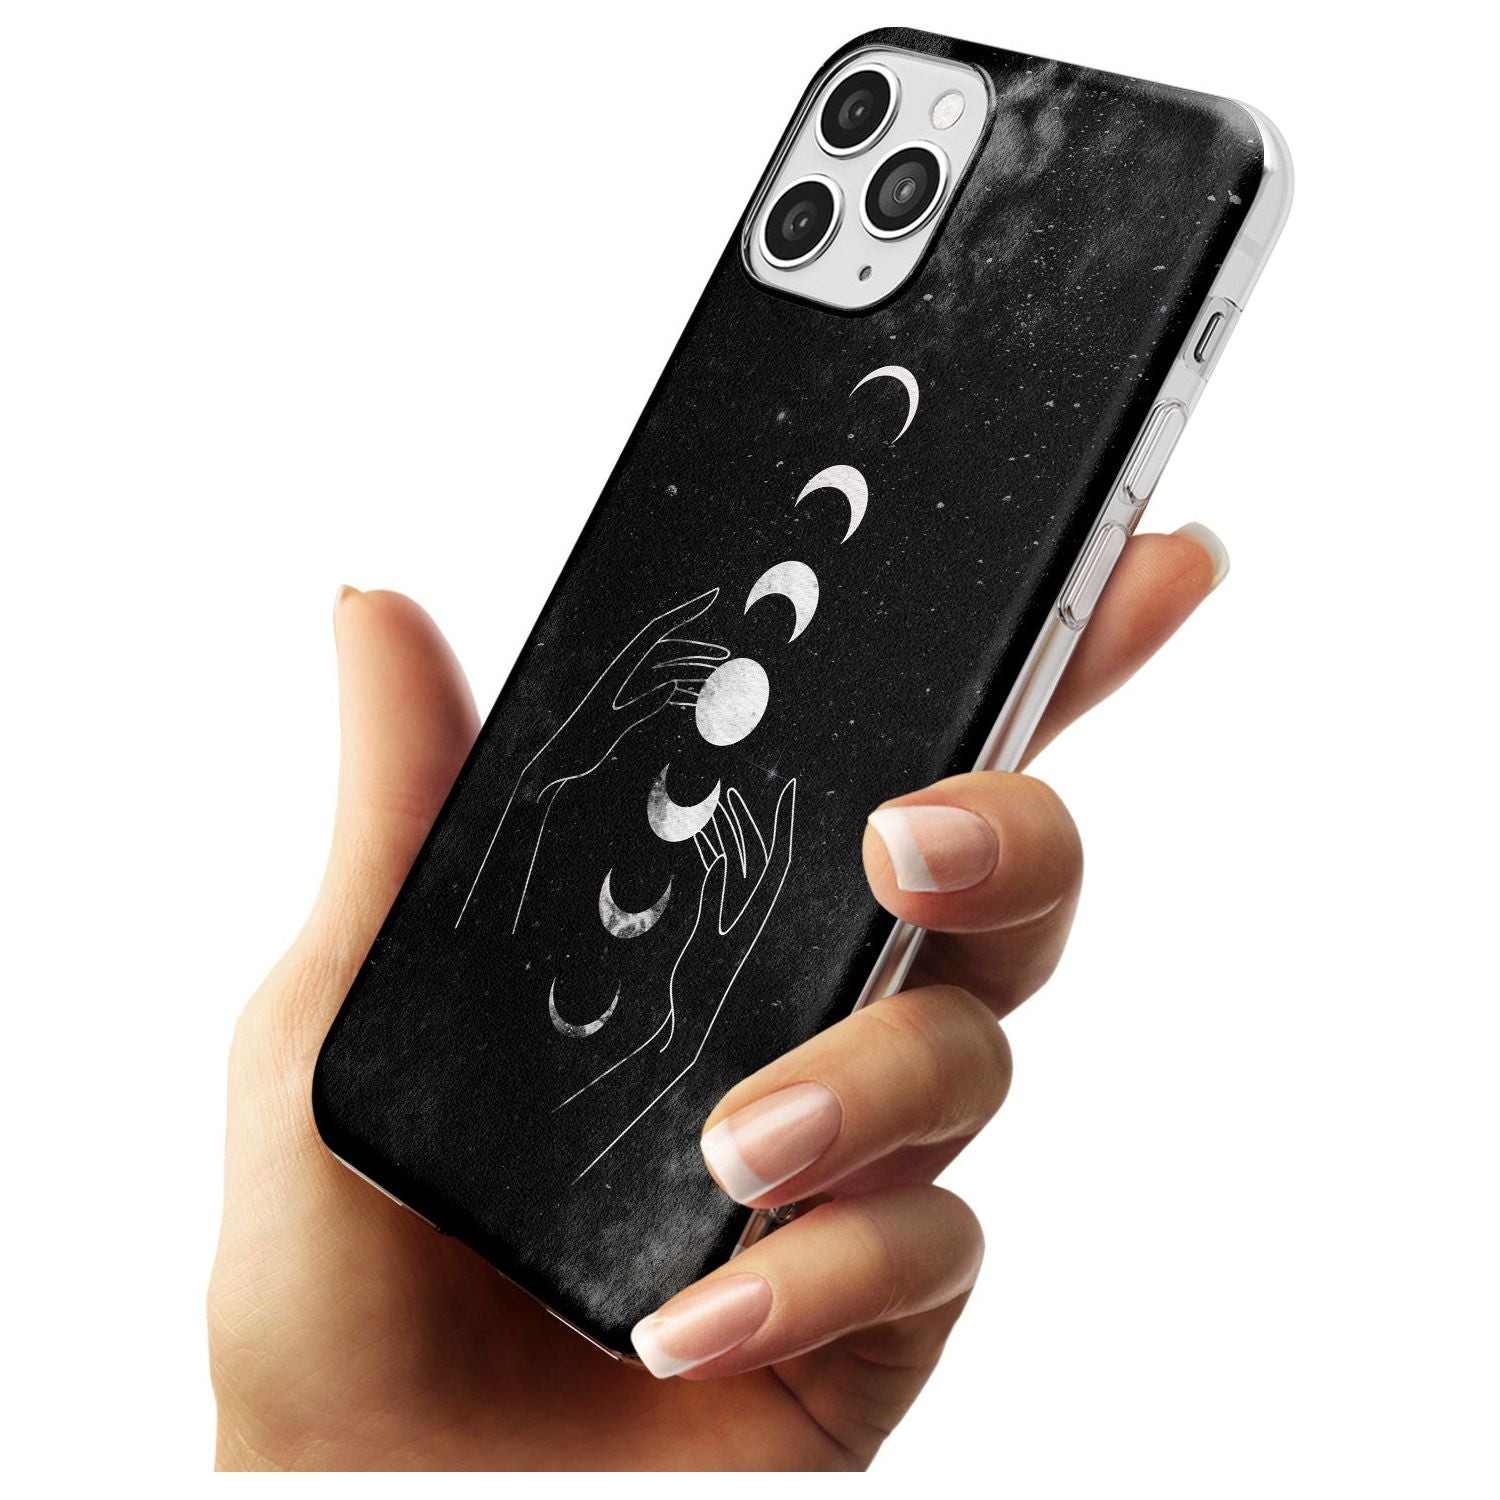 Moon Phases and Hands Slim TPU Phone Case for iPhone 11 Pro Max